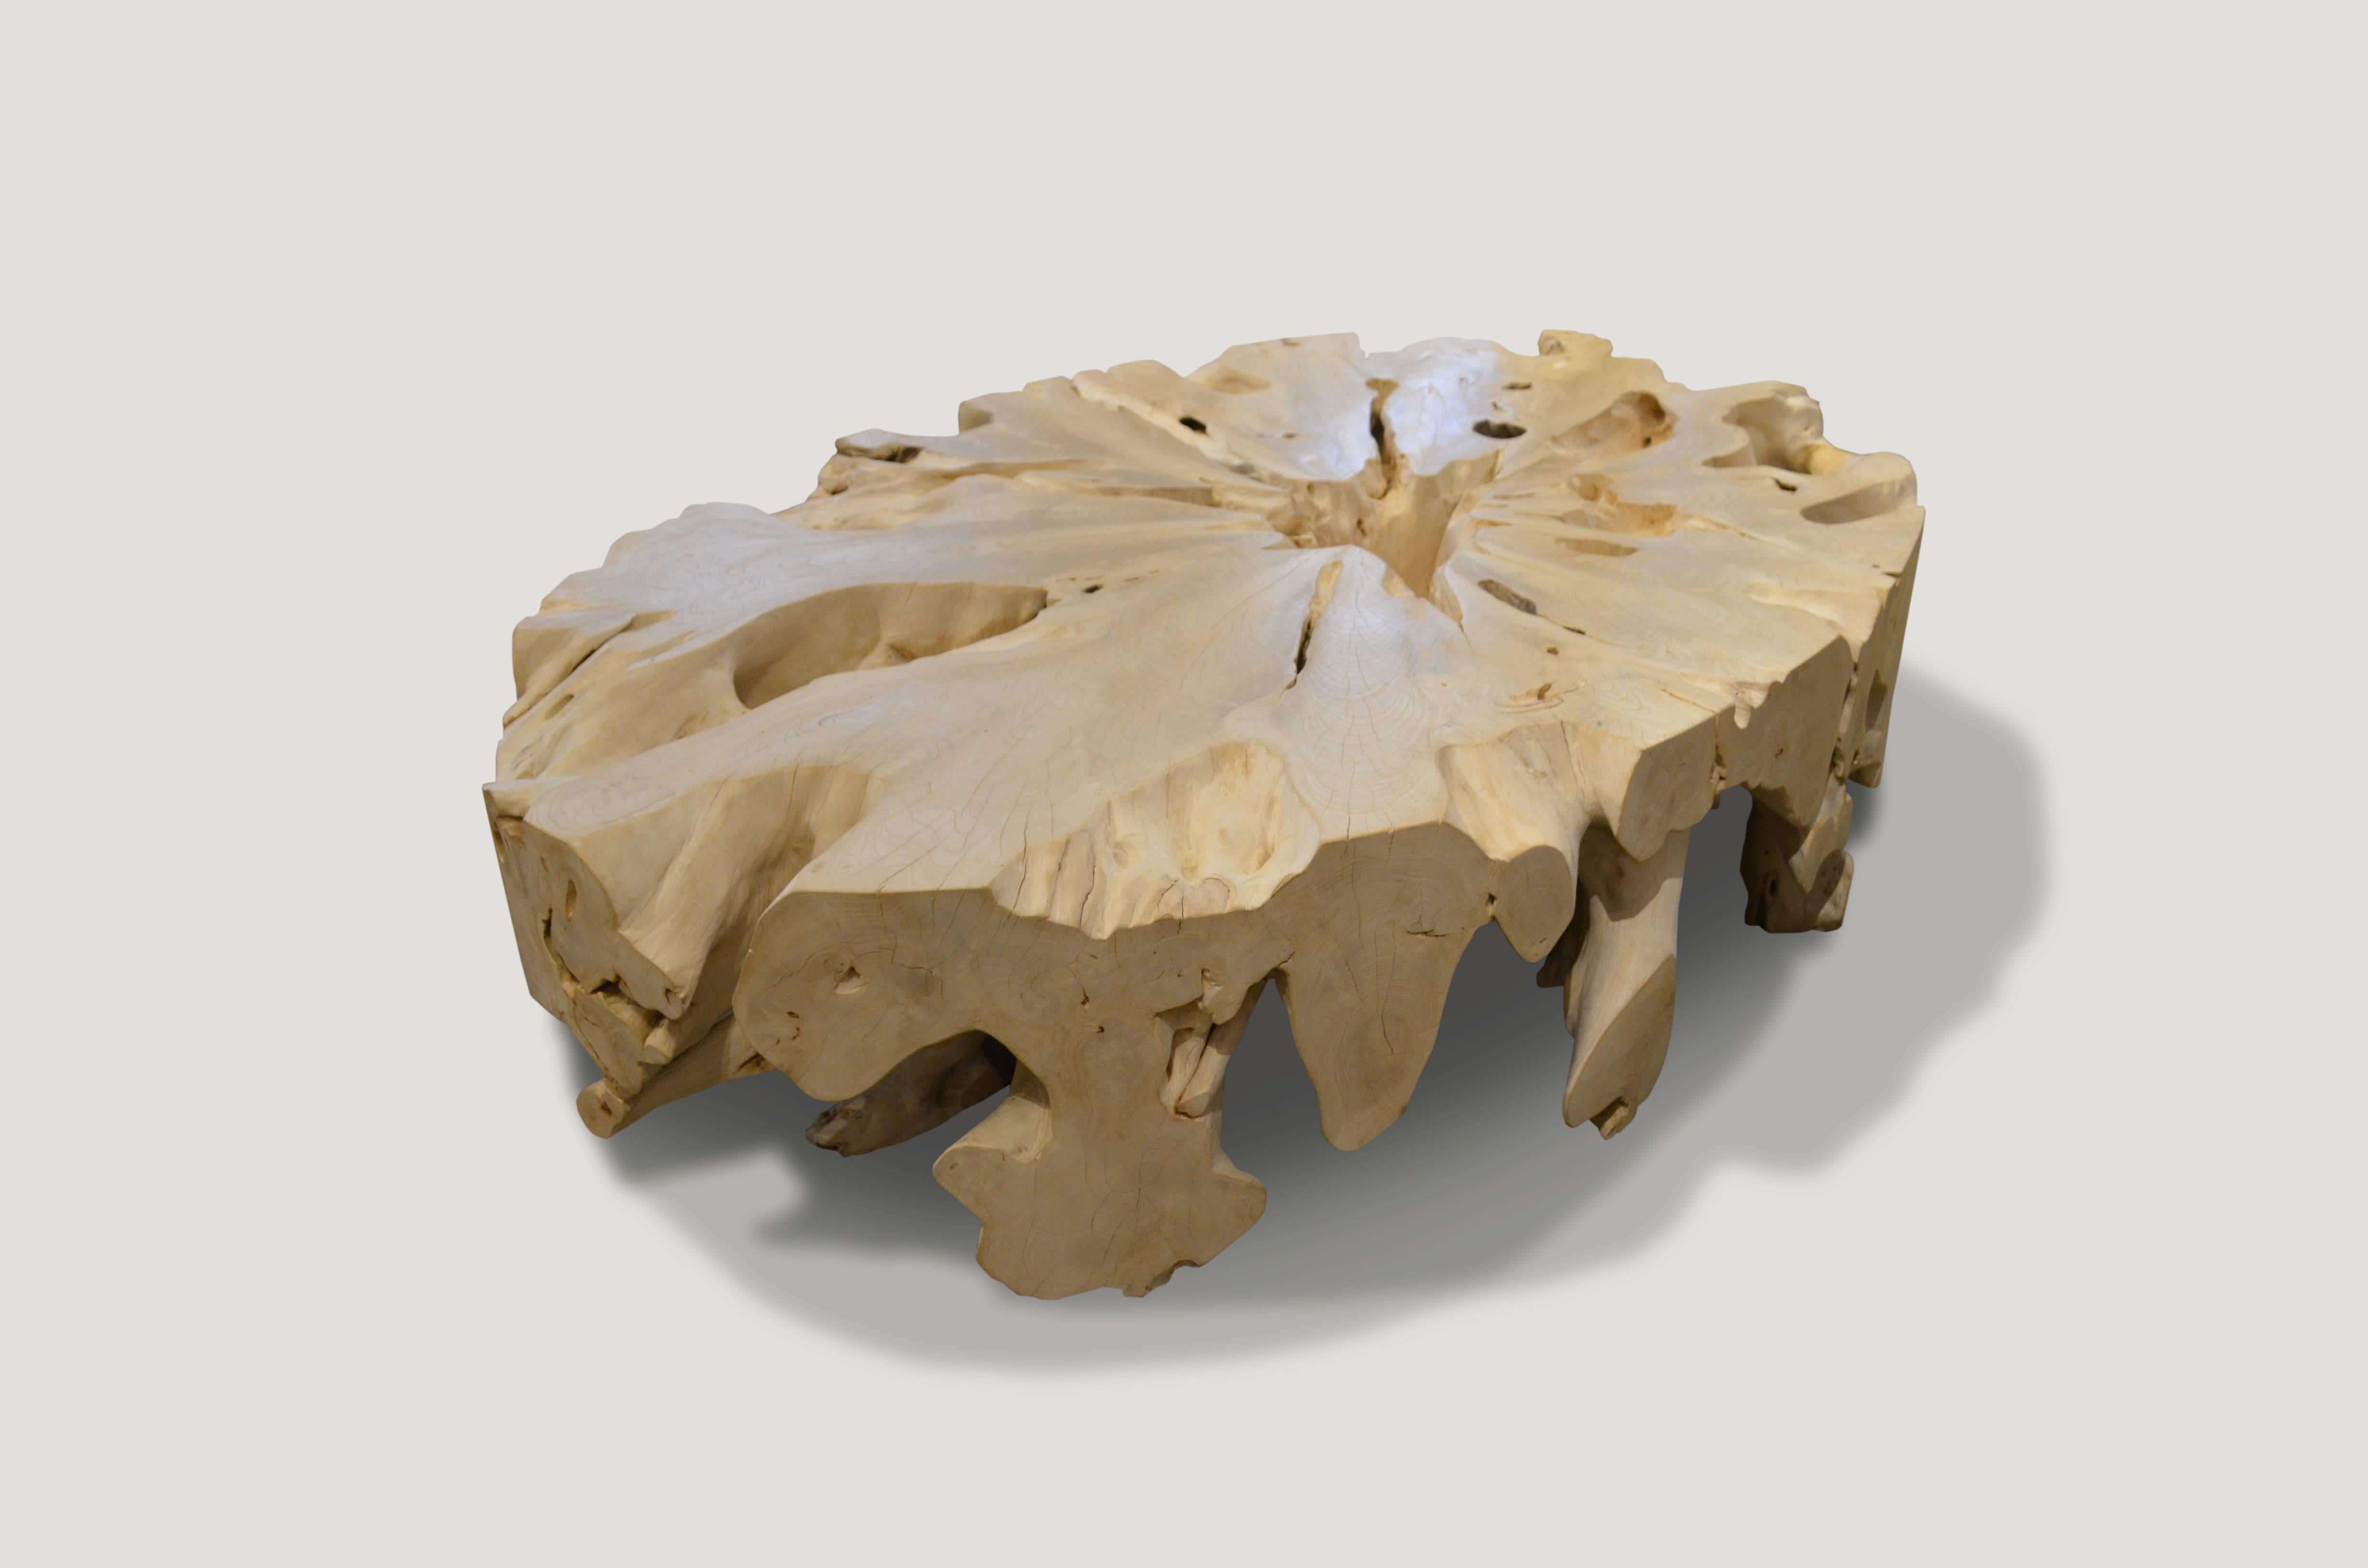 Impressive, single root teak wood coffee table. The reclaimed teak wood is bleached and left to bake in the sun and sea salt air for over a year to achieve this unique finish. We have added a light shellac to the top and flat side sections for a